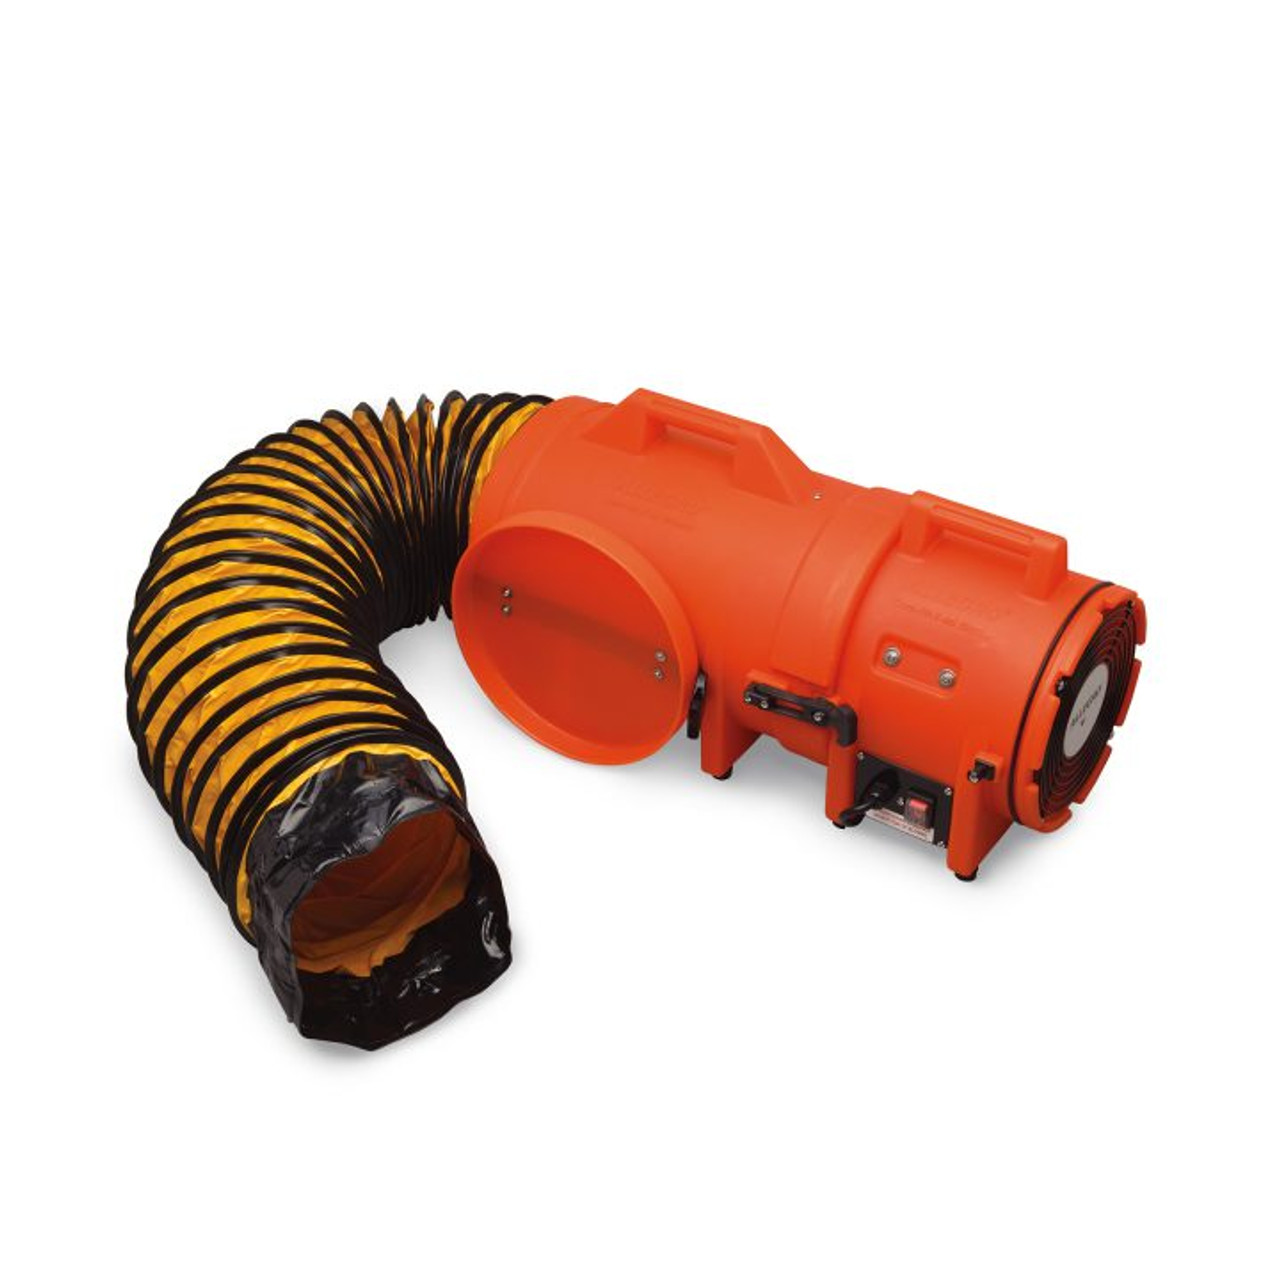 8" Axial AC Plastic Blower w/ Compact Canister & 50’ Ducting, 40 lbs. (9533-50)